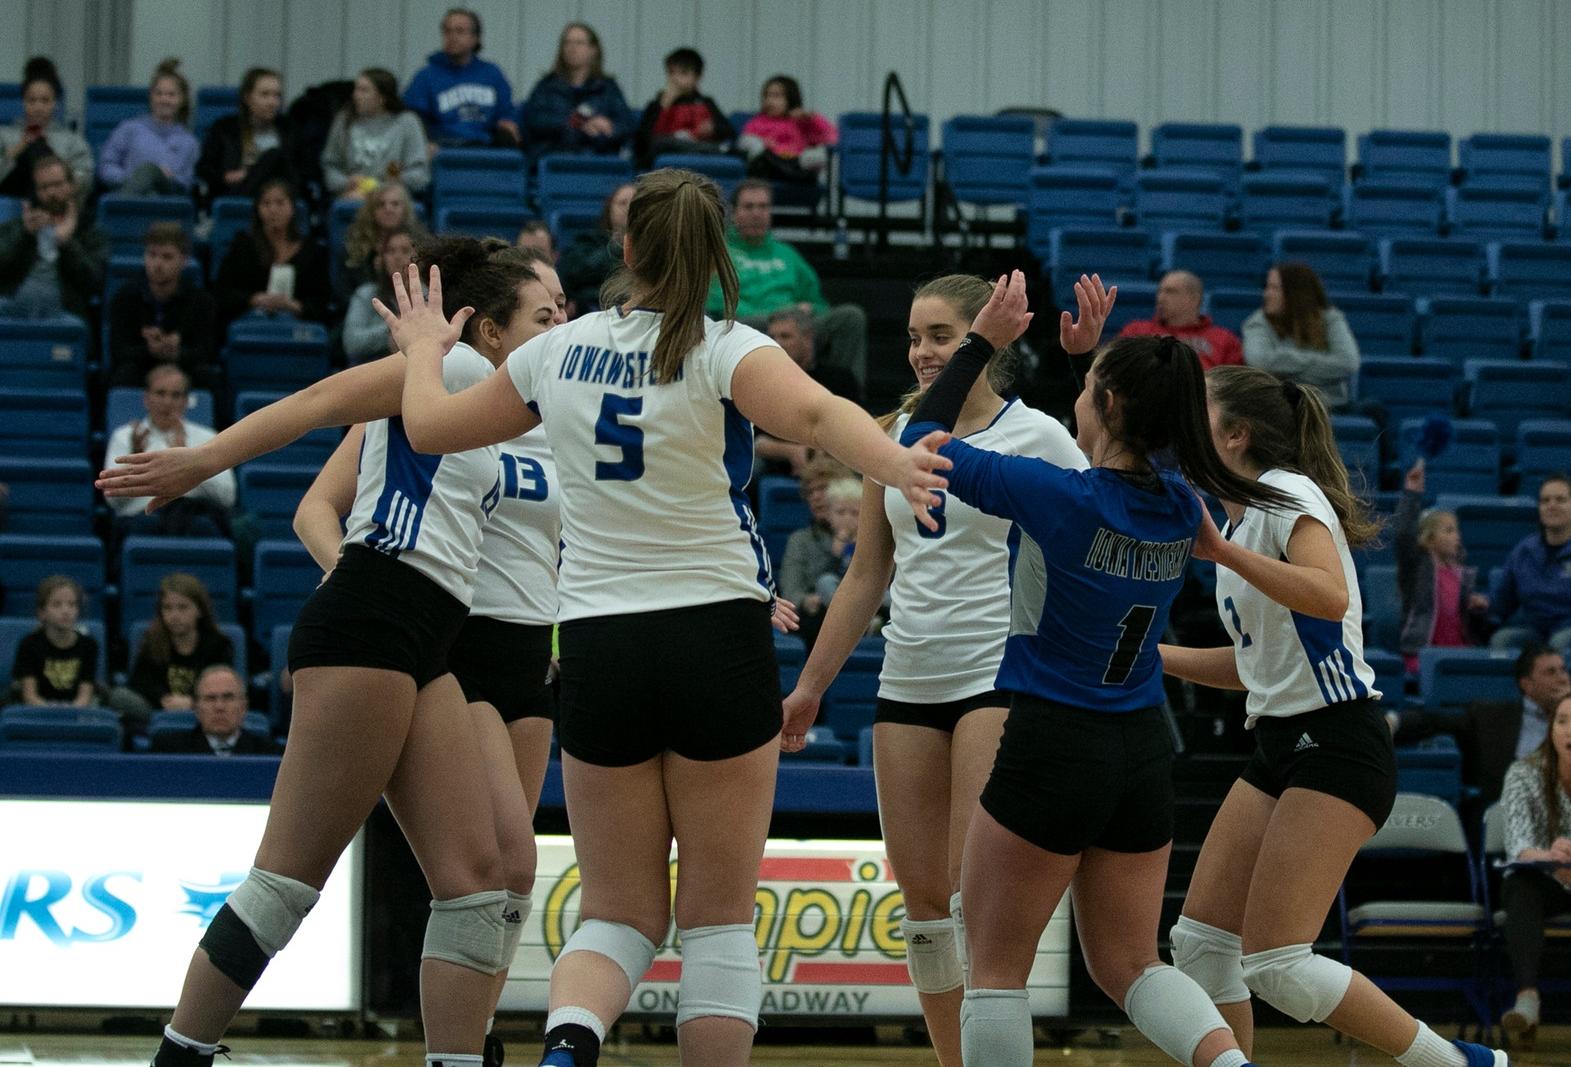 Reivers Split ICCAC Title with Indian Hills